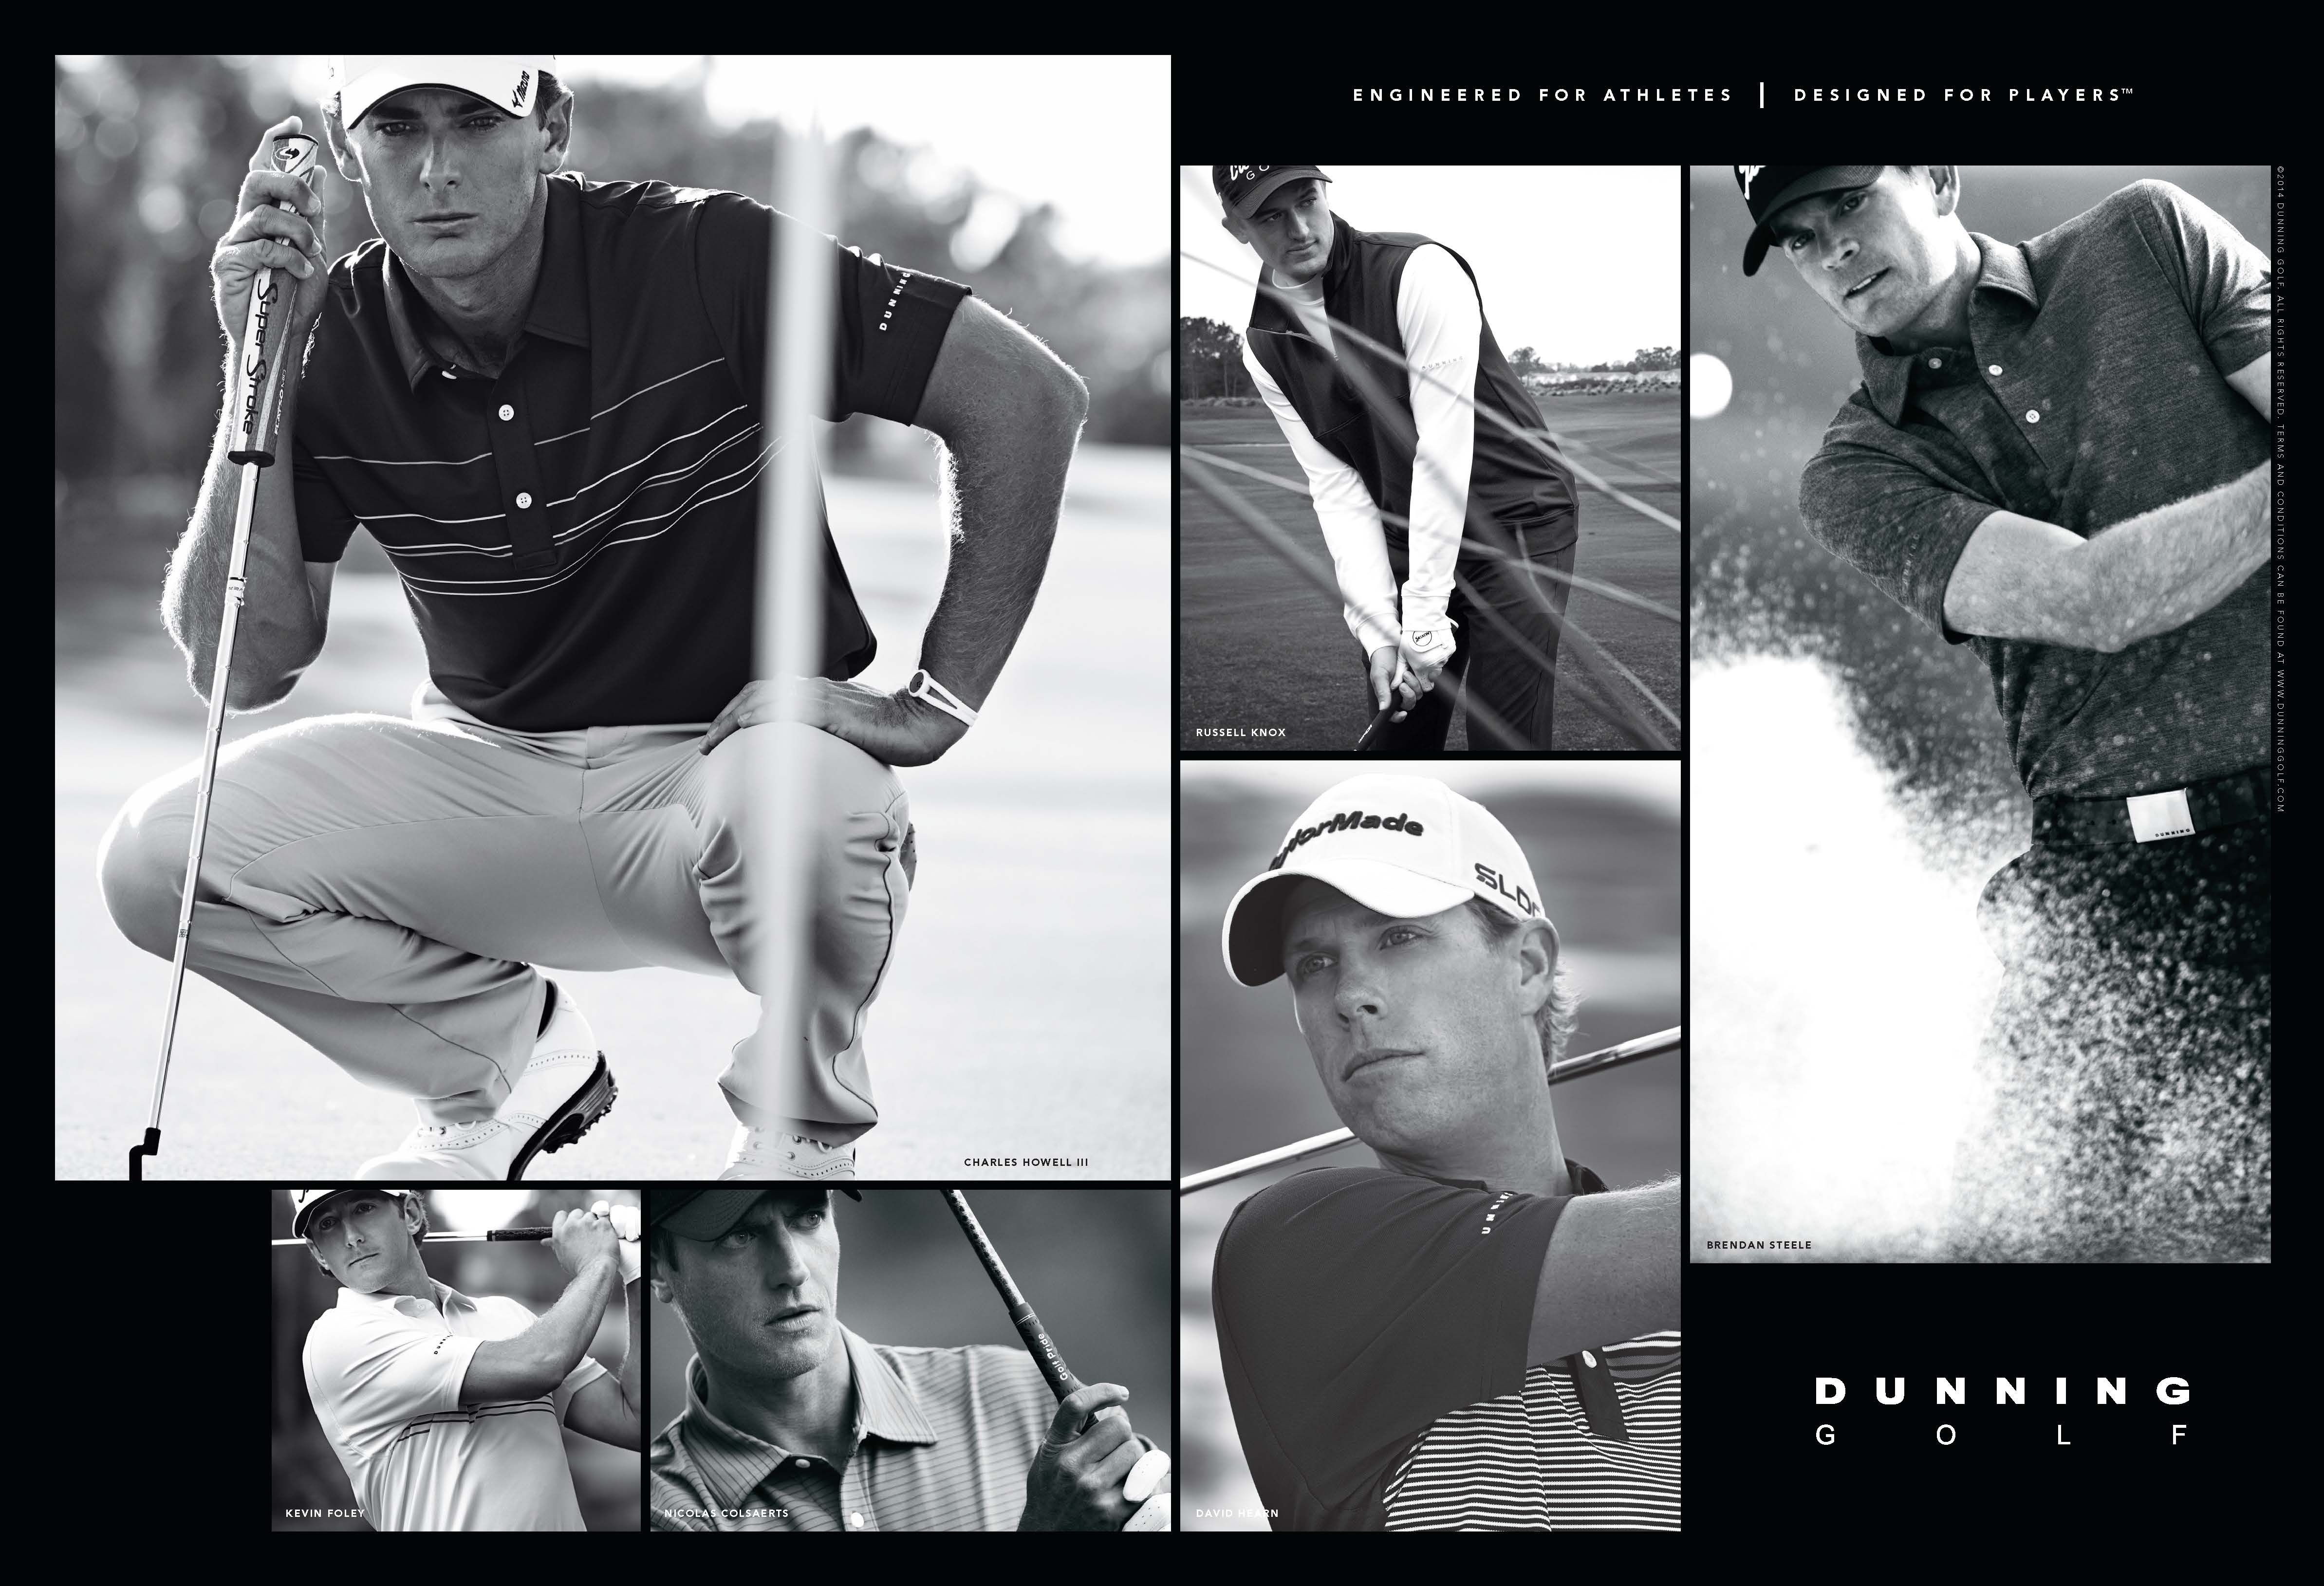 New advertisement for Dunning Golf by Collaborated Inc.